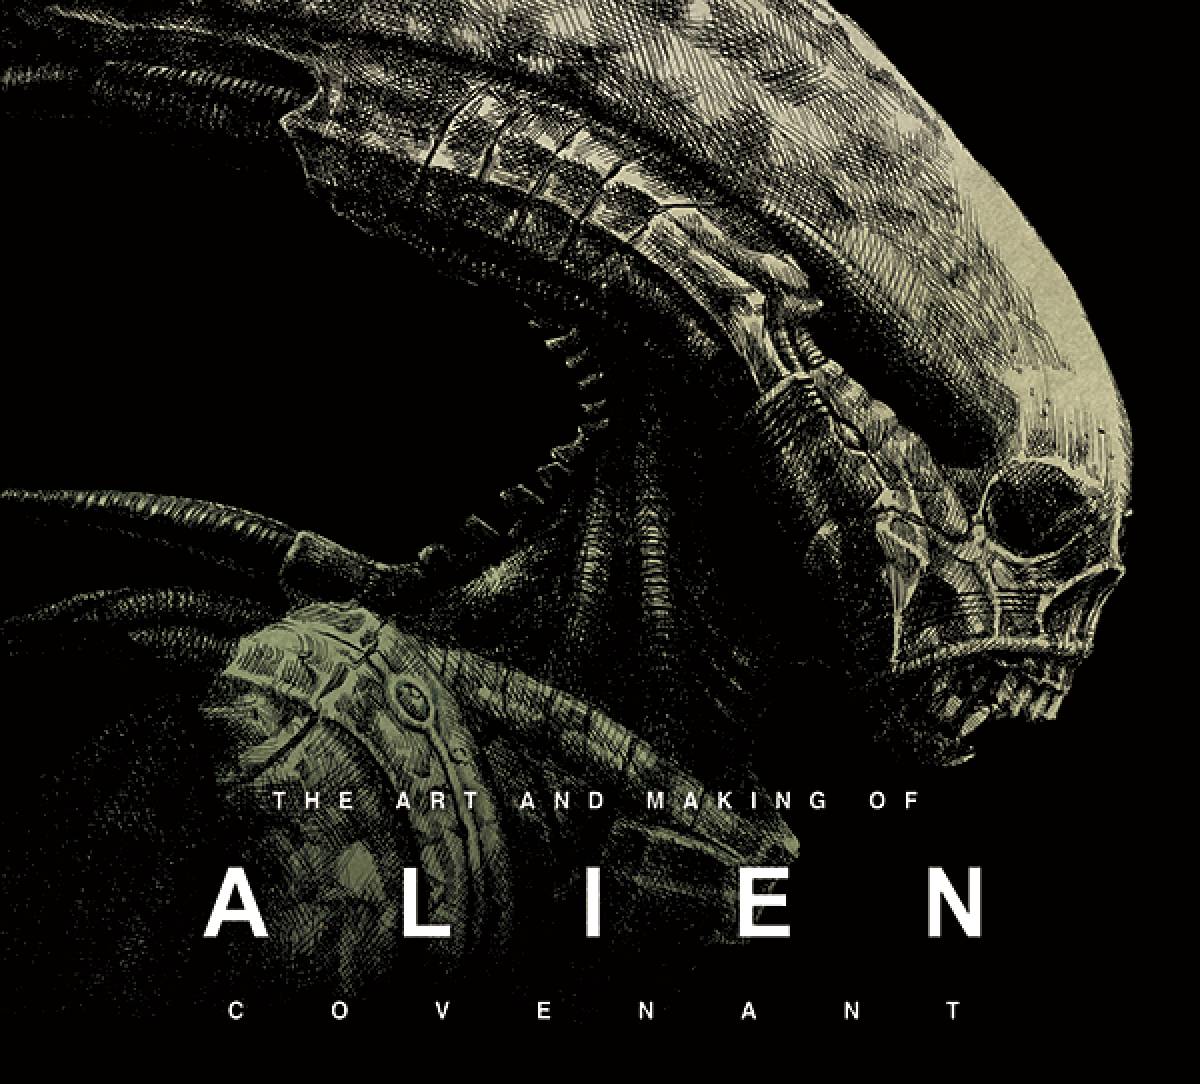 Art And Making of Alien Covenant Hardcover